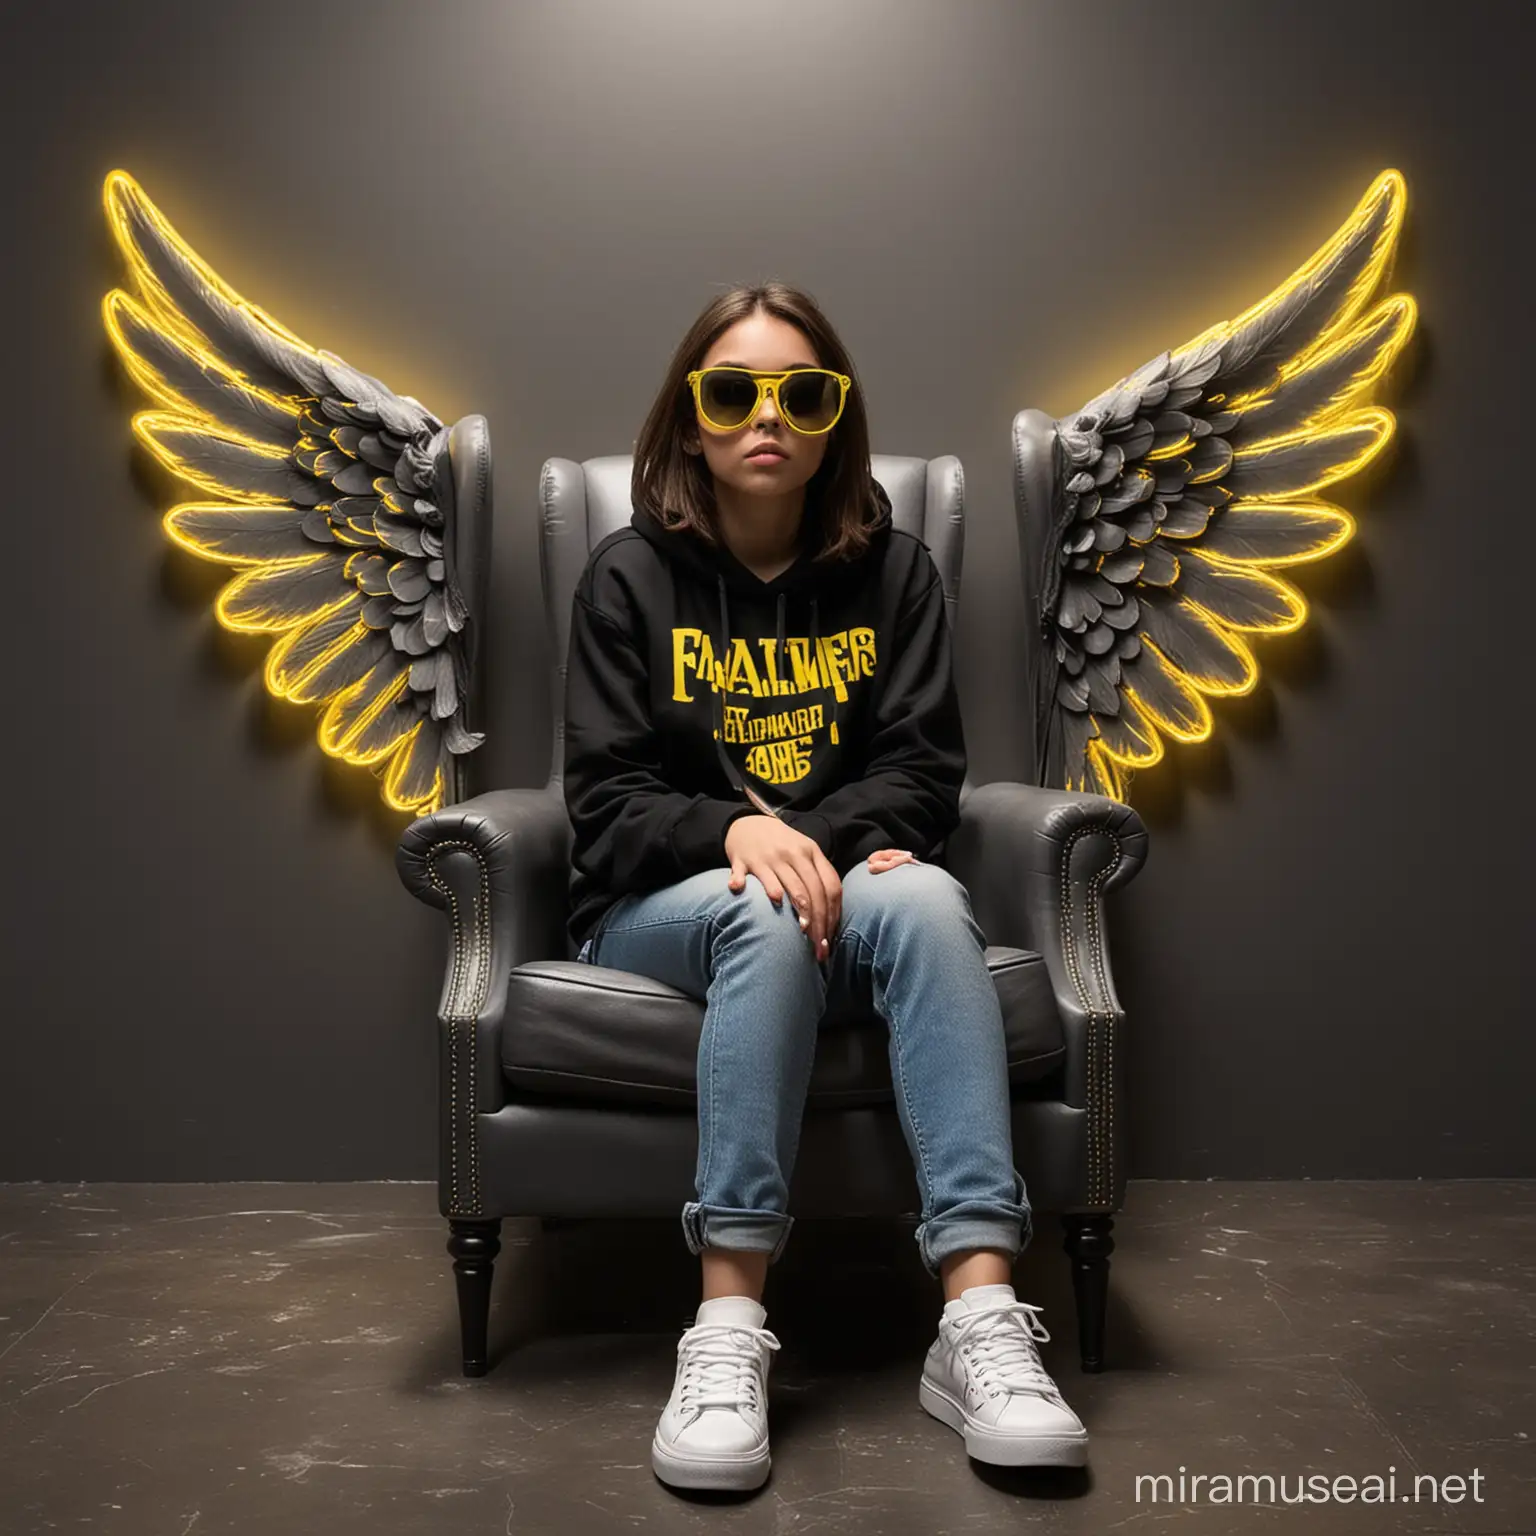 create a 3D illusion for a profile picture where a [14] year old cute girl in a black hoodie sitting casually on a wingback chair wearing sneakers, and sunglasses, she looks ahead the background features fateme in big and capital yellow neon light fonts on the dark grey wall. there should not be his shadow, and there are wings to make it appear as if he is an angel